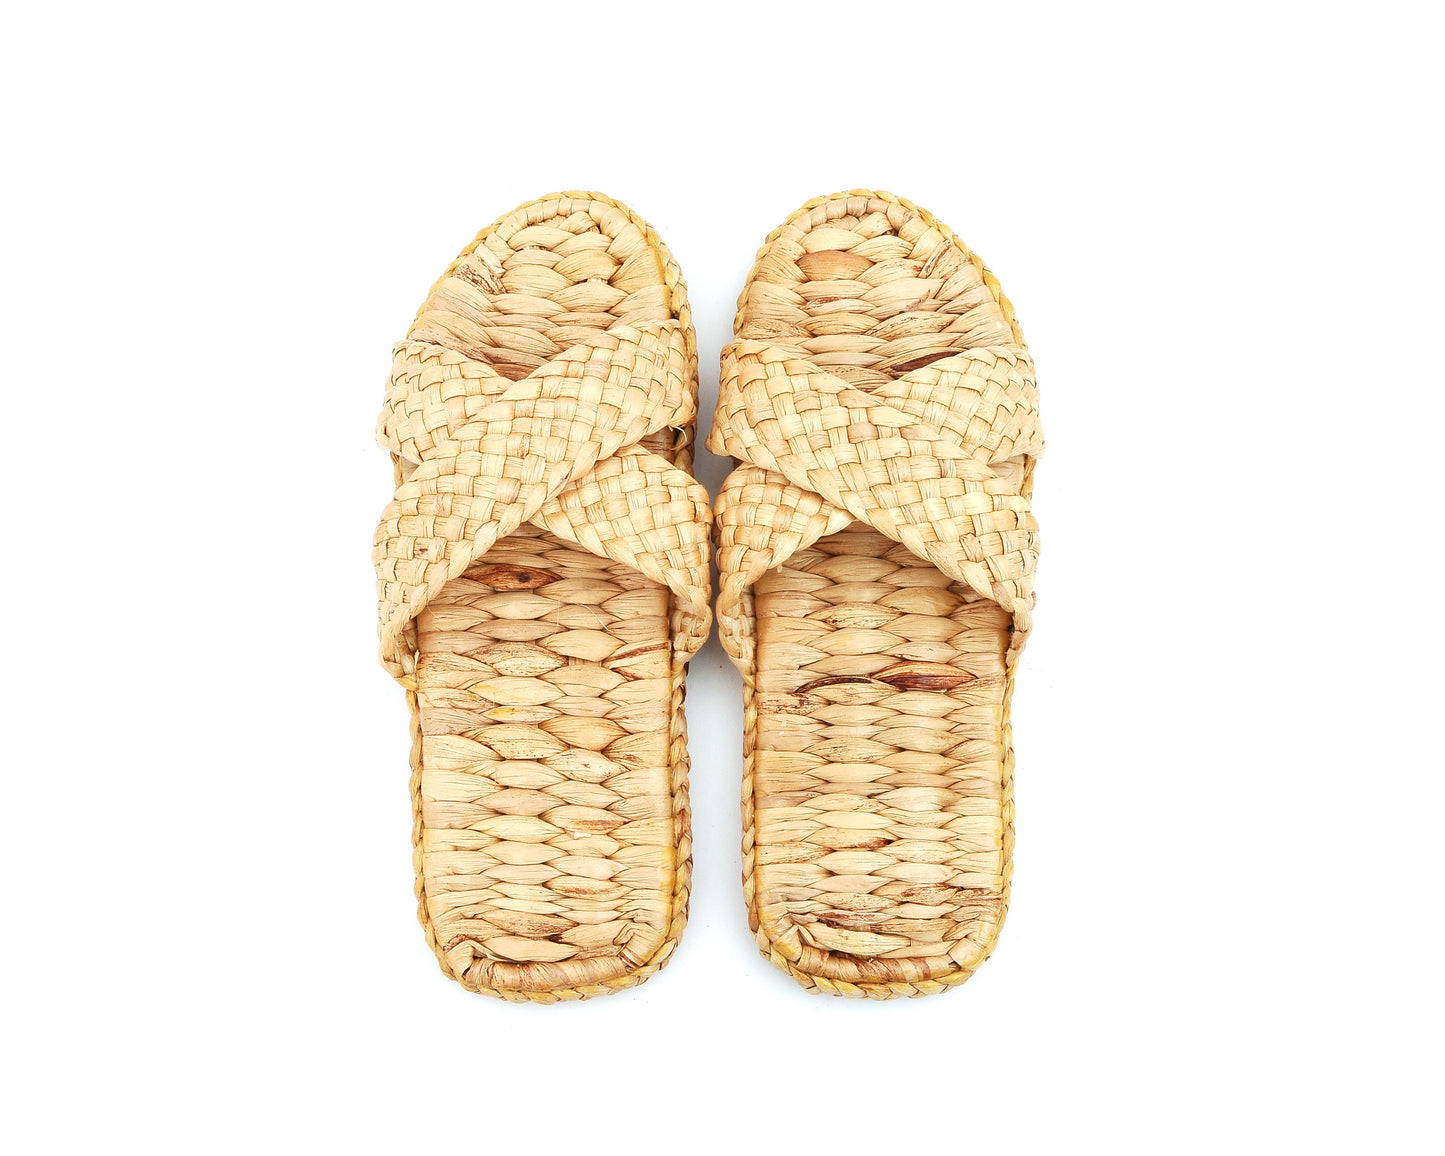 Natural Handmade - Cross Slippers for Men and Ladies - Hand Woven Water Hyacinth